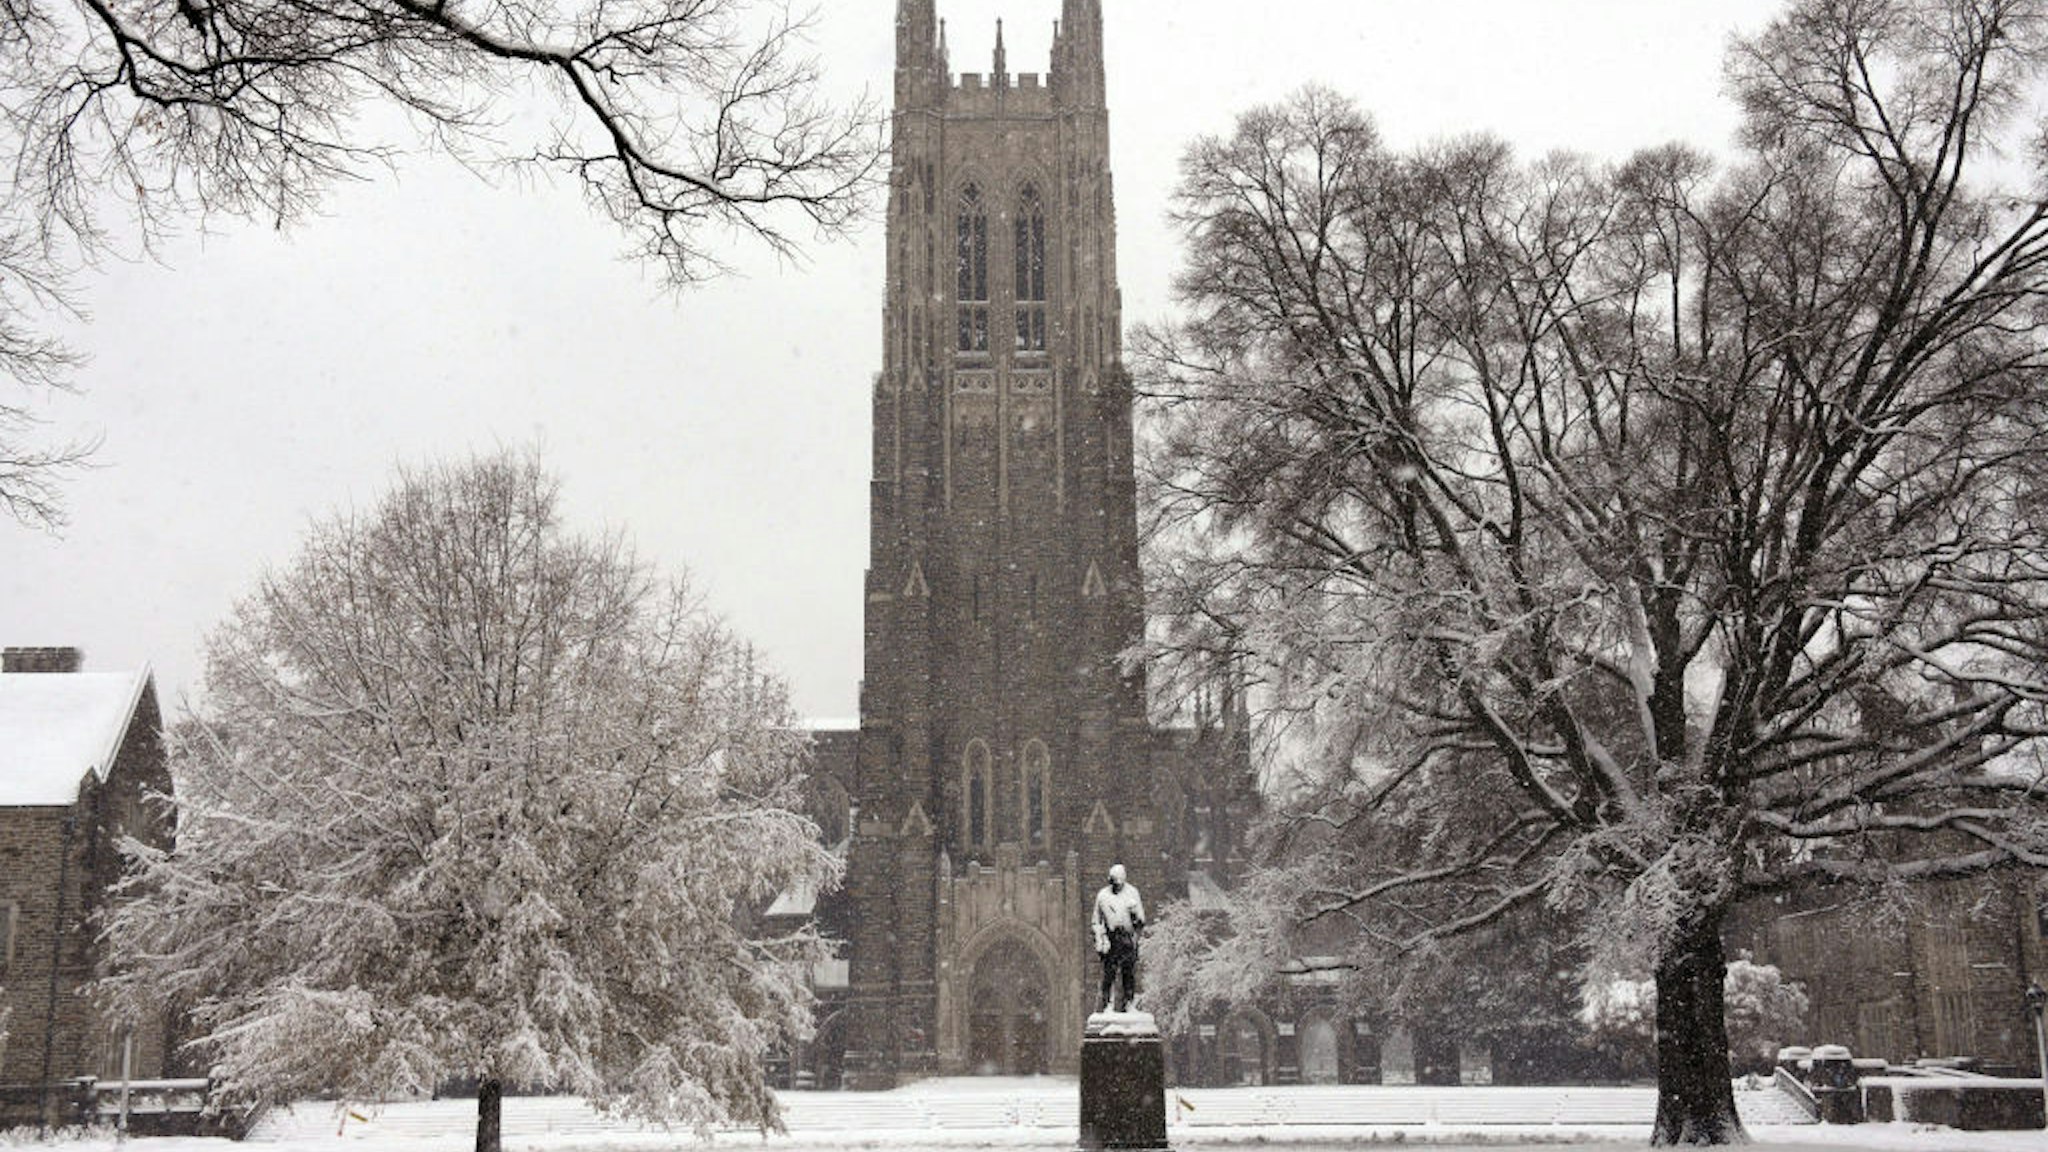 A general view of the Duke Chapel on the campus of Duke University as snow falls from Winter Storm Diego on December 9, 2018 in Durham, North Carolina.